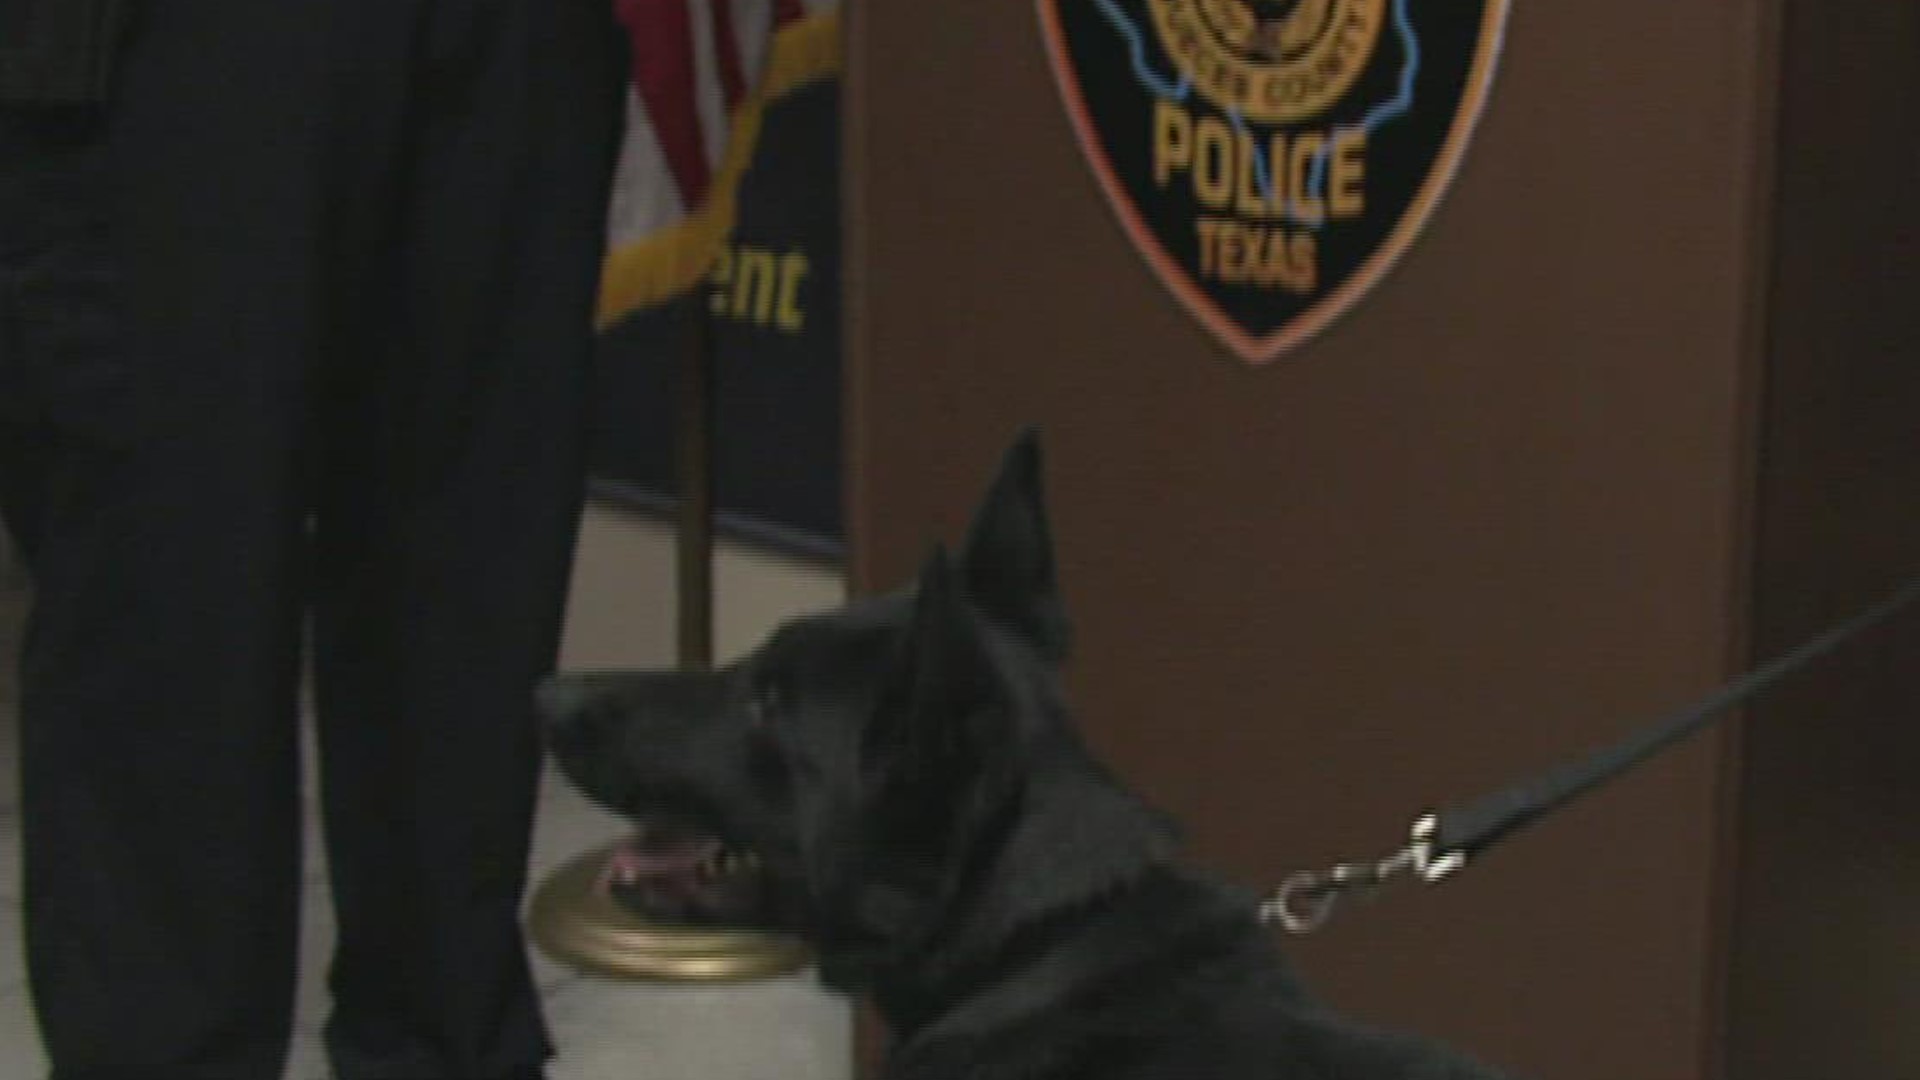 The K9 officer was bought using the drug asset forfeiture funds.